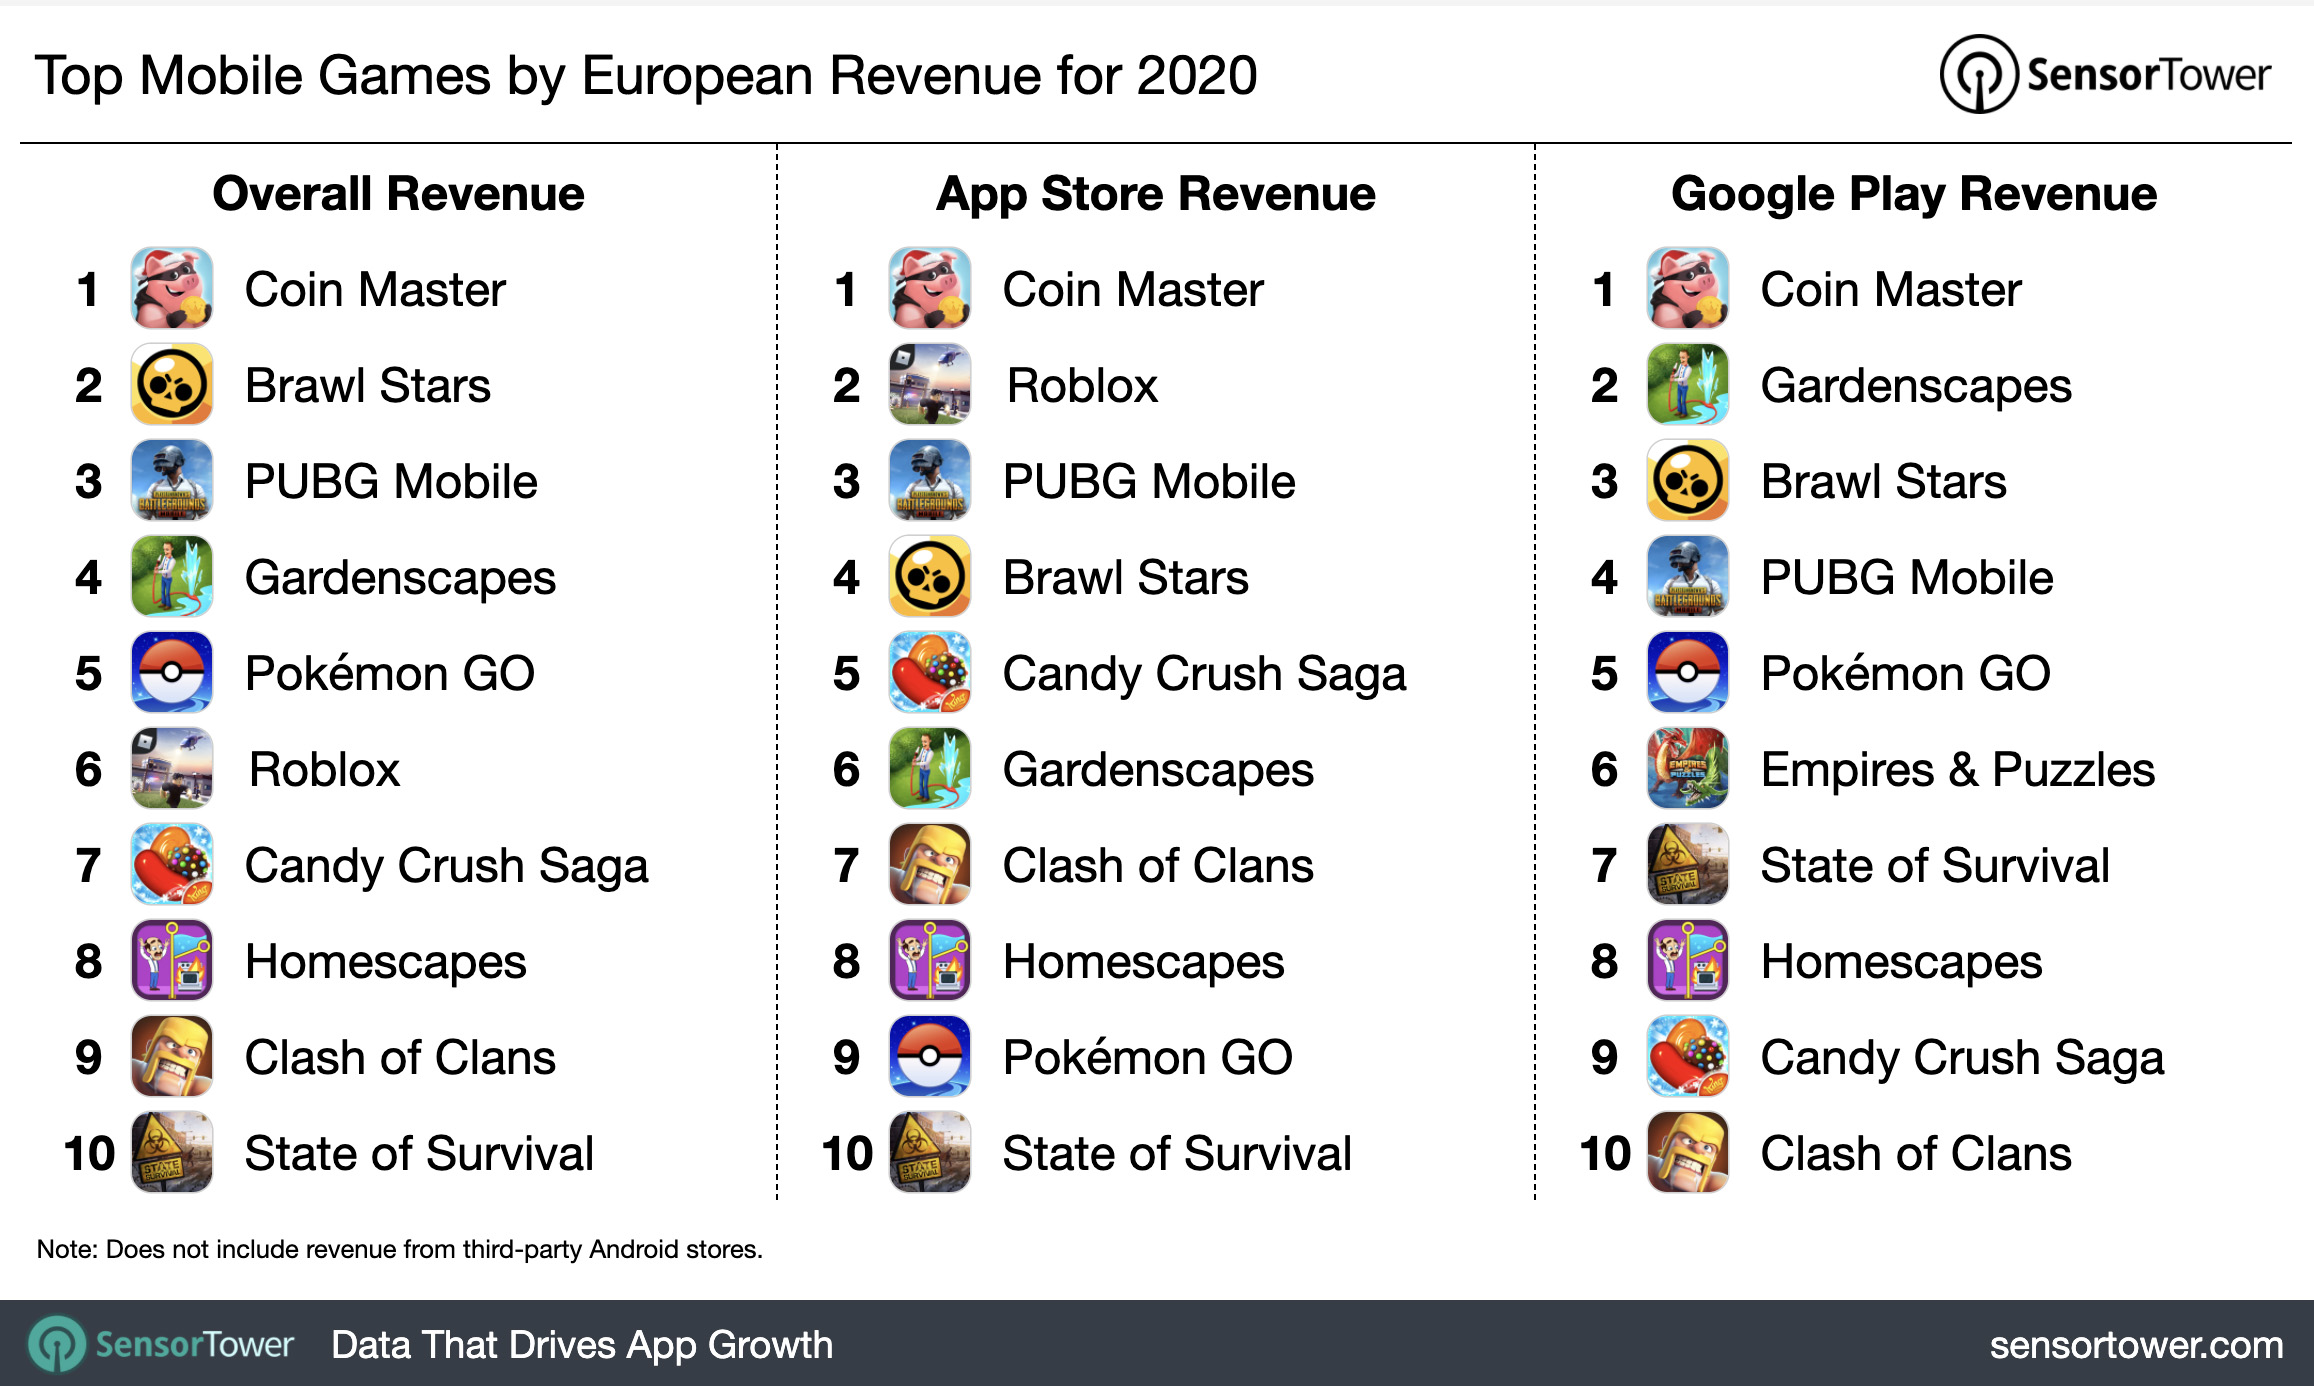 Top Mobile Games by European Revenue for 2020